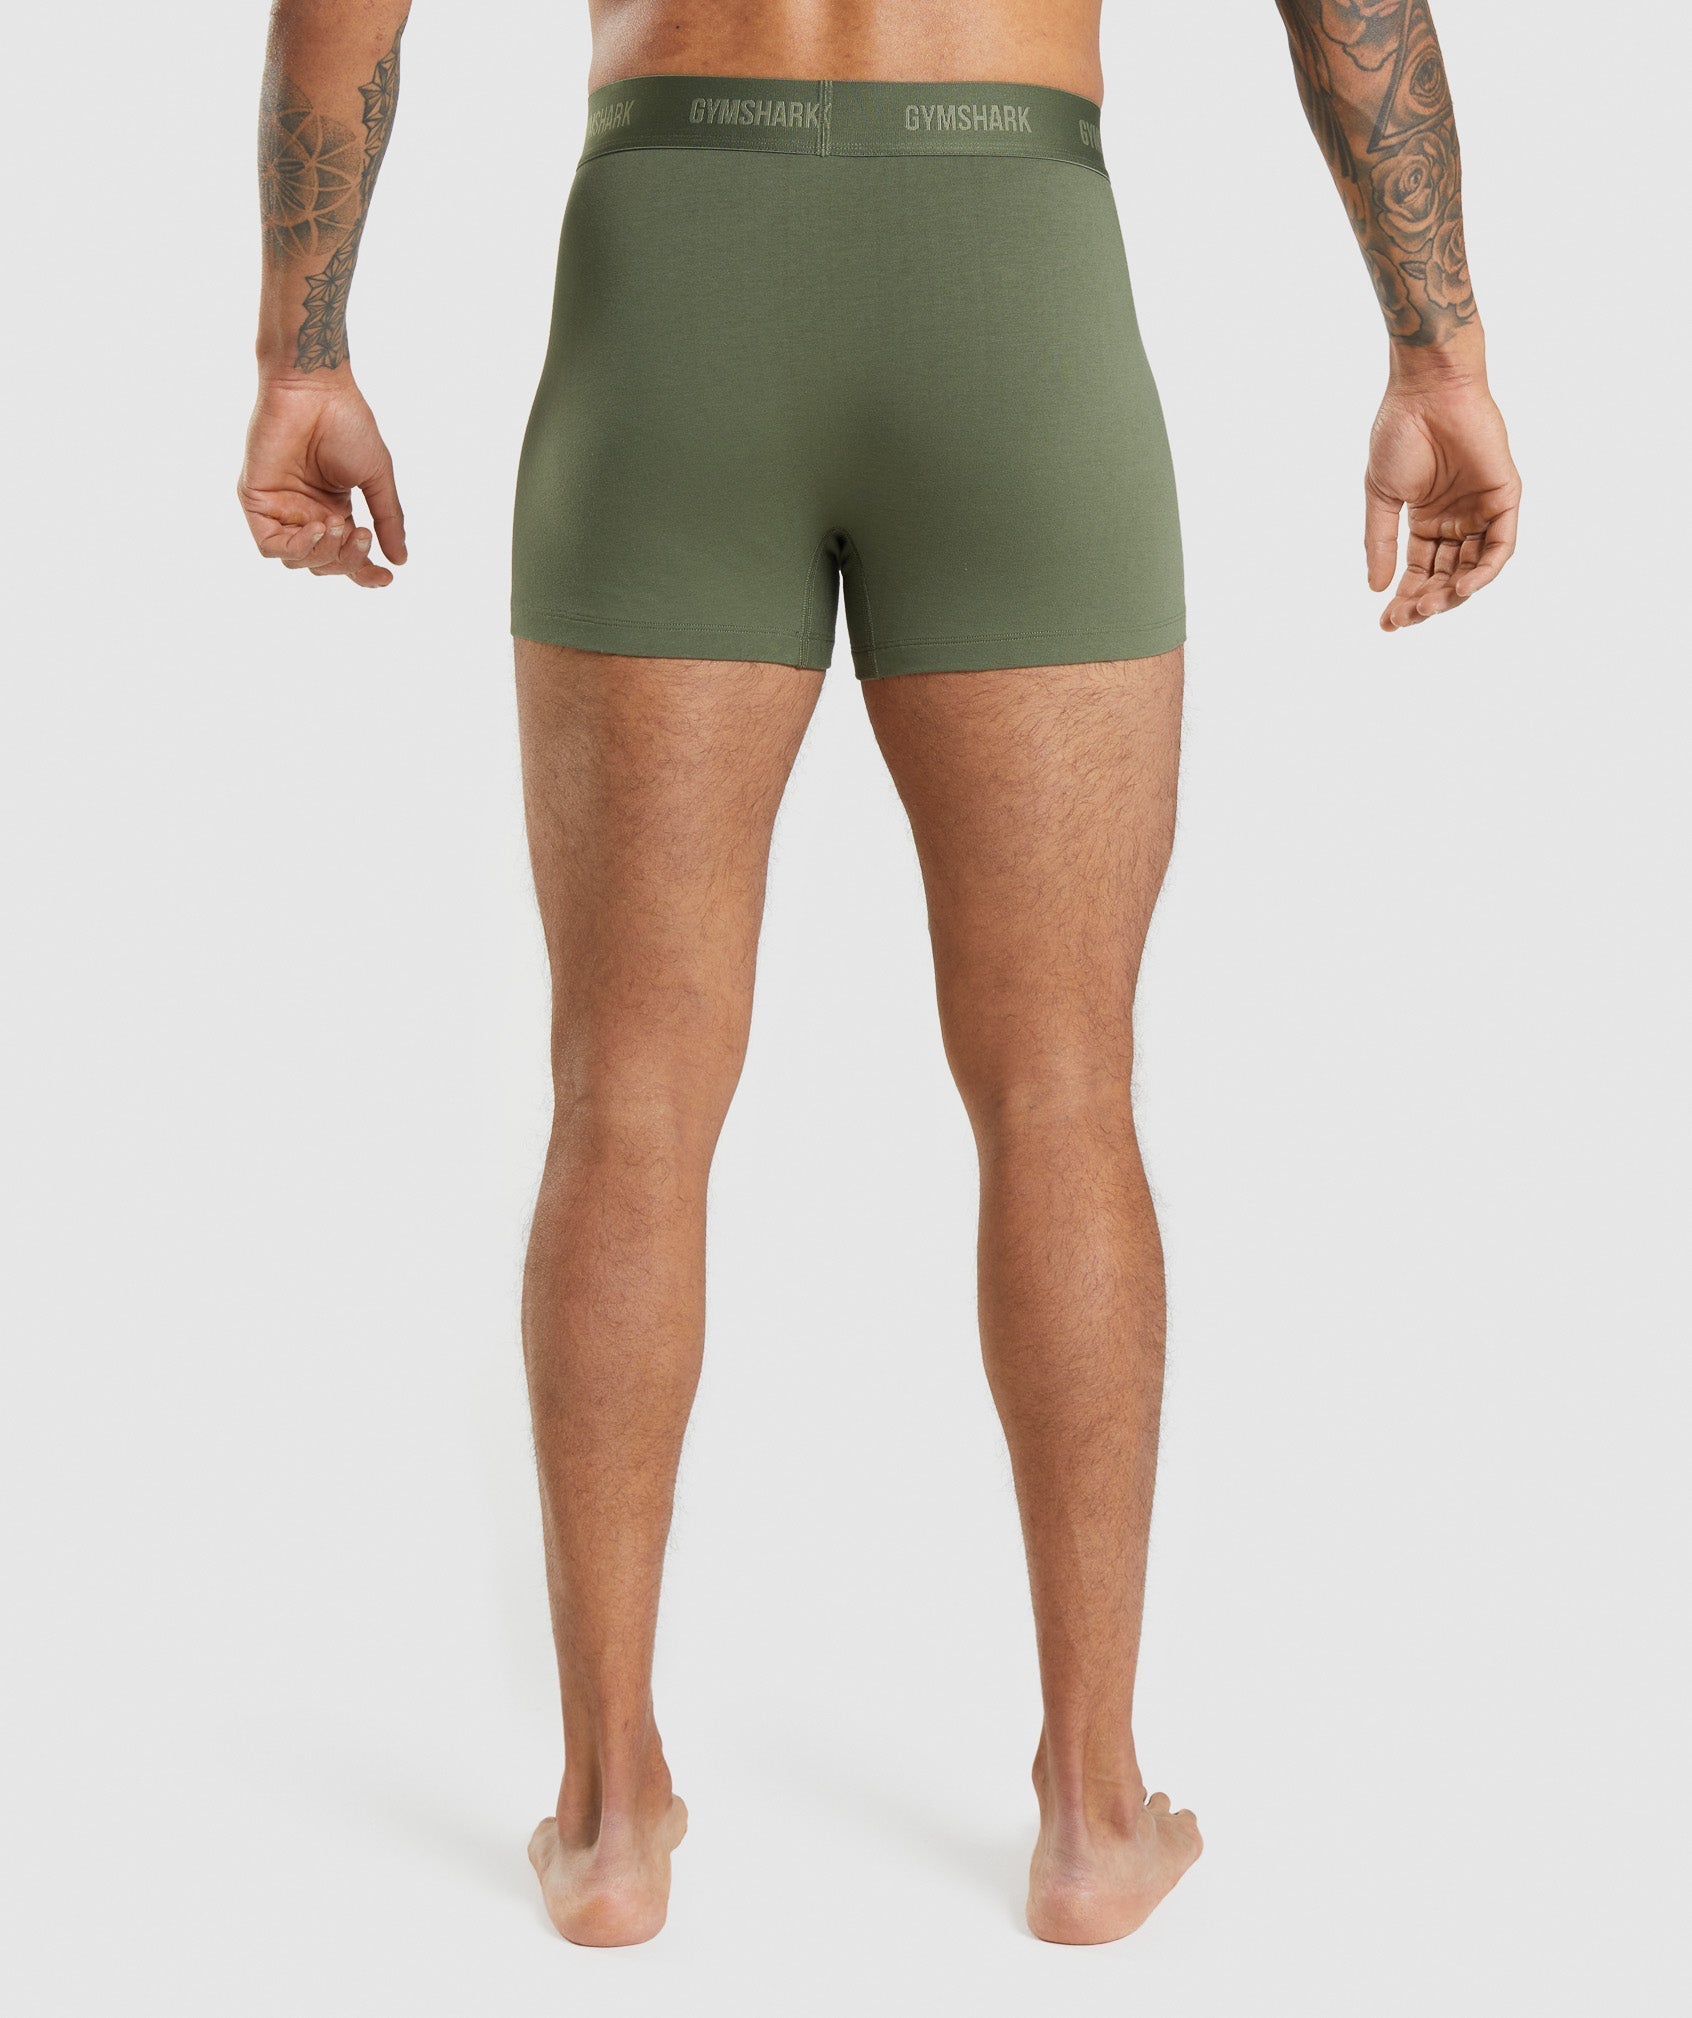 Boxers 2pk in Core Olive/Navy - view 4